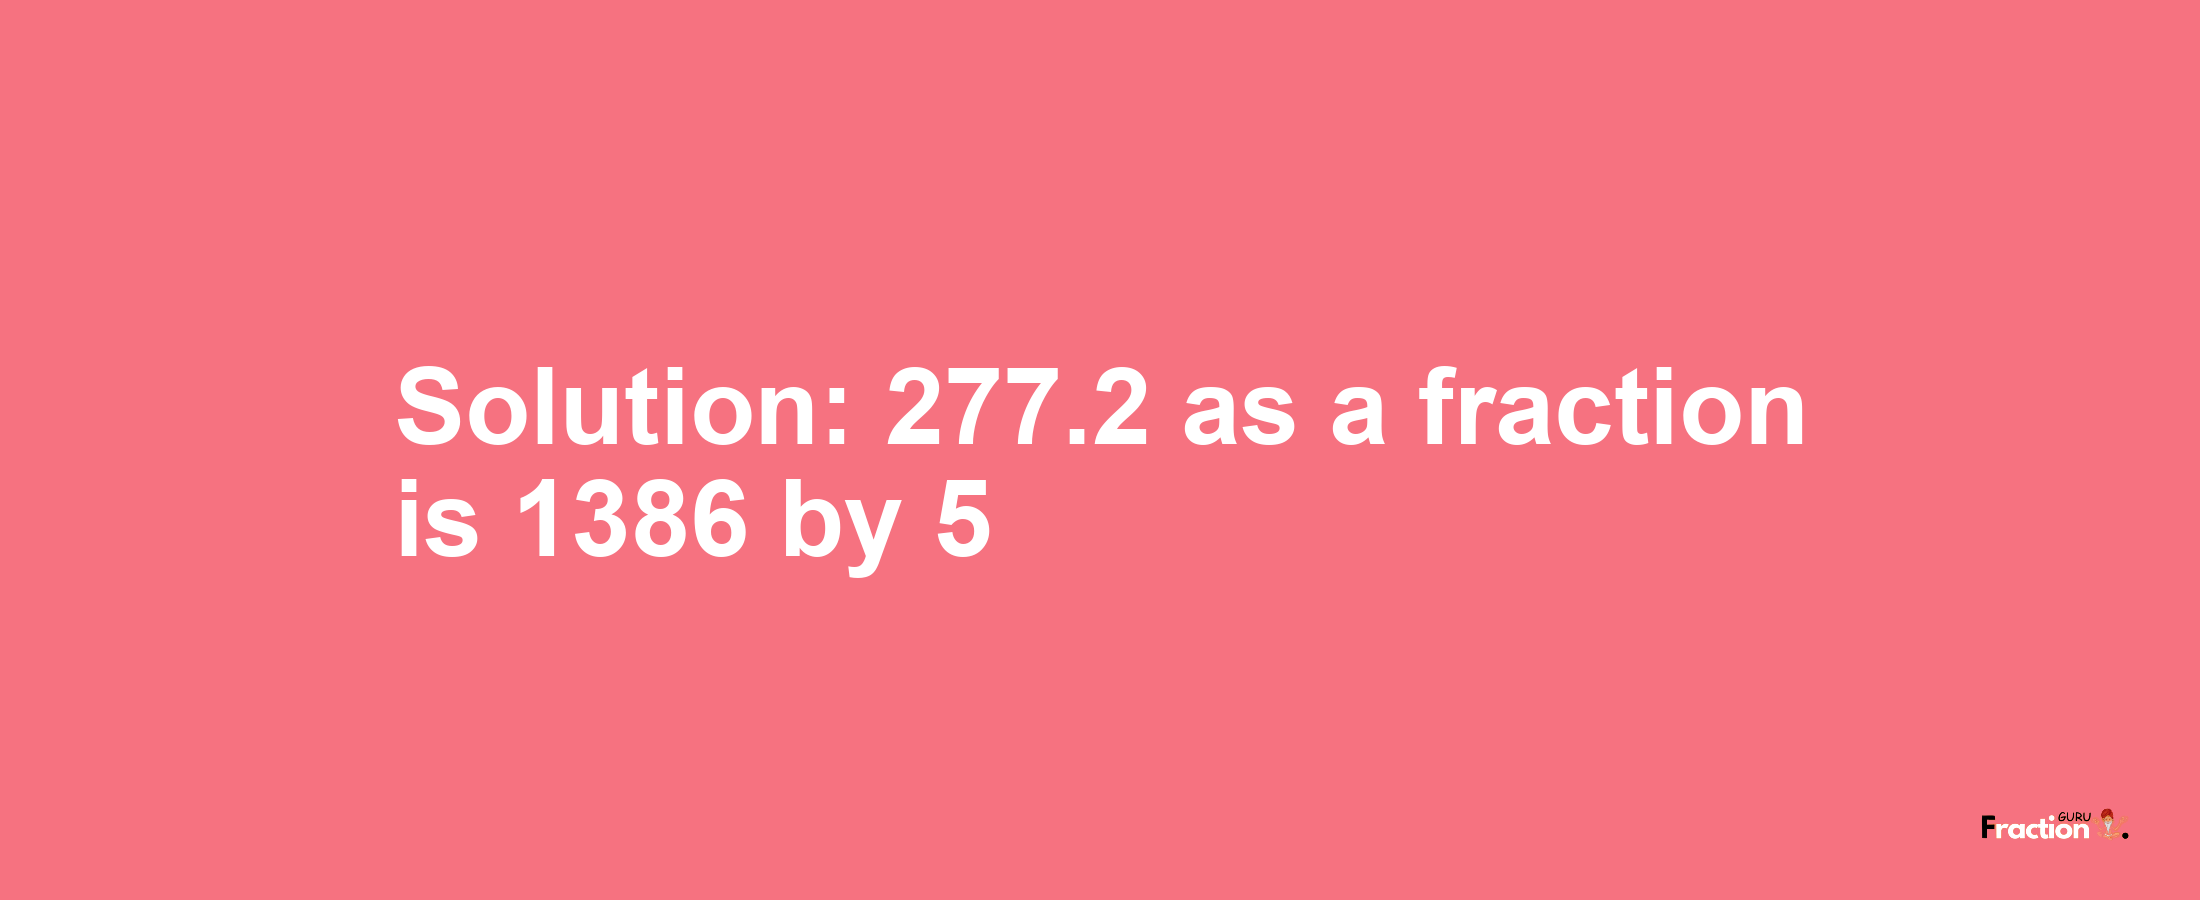 Solution:277.2 as a fraction is 1386/5